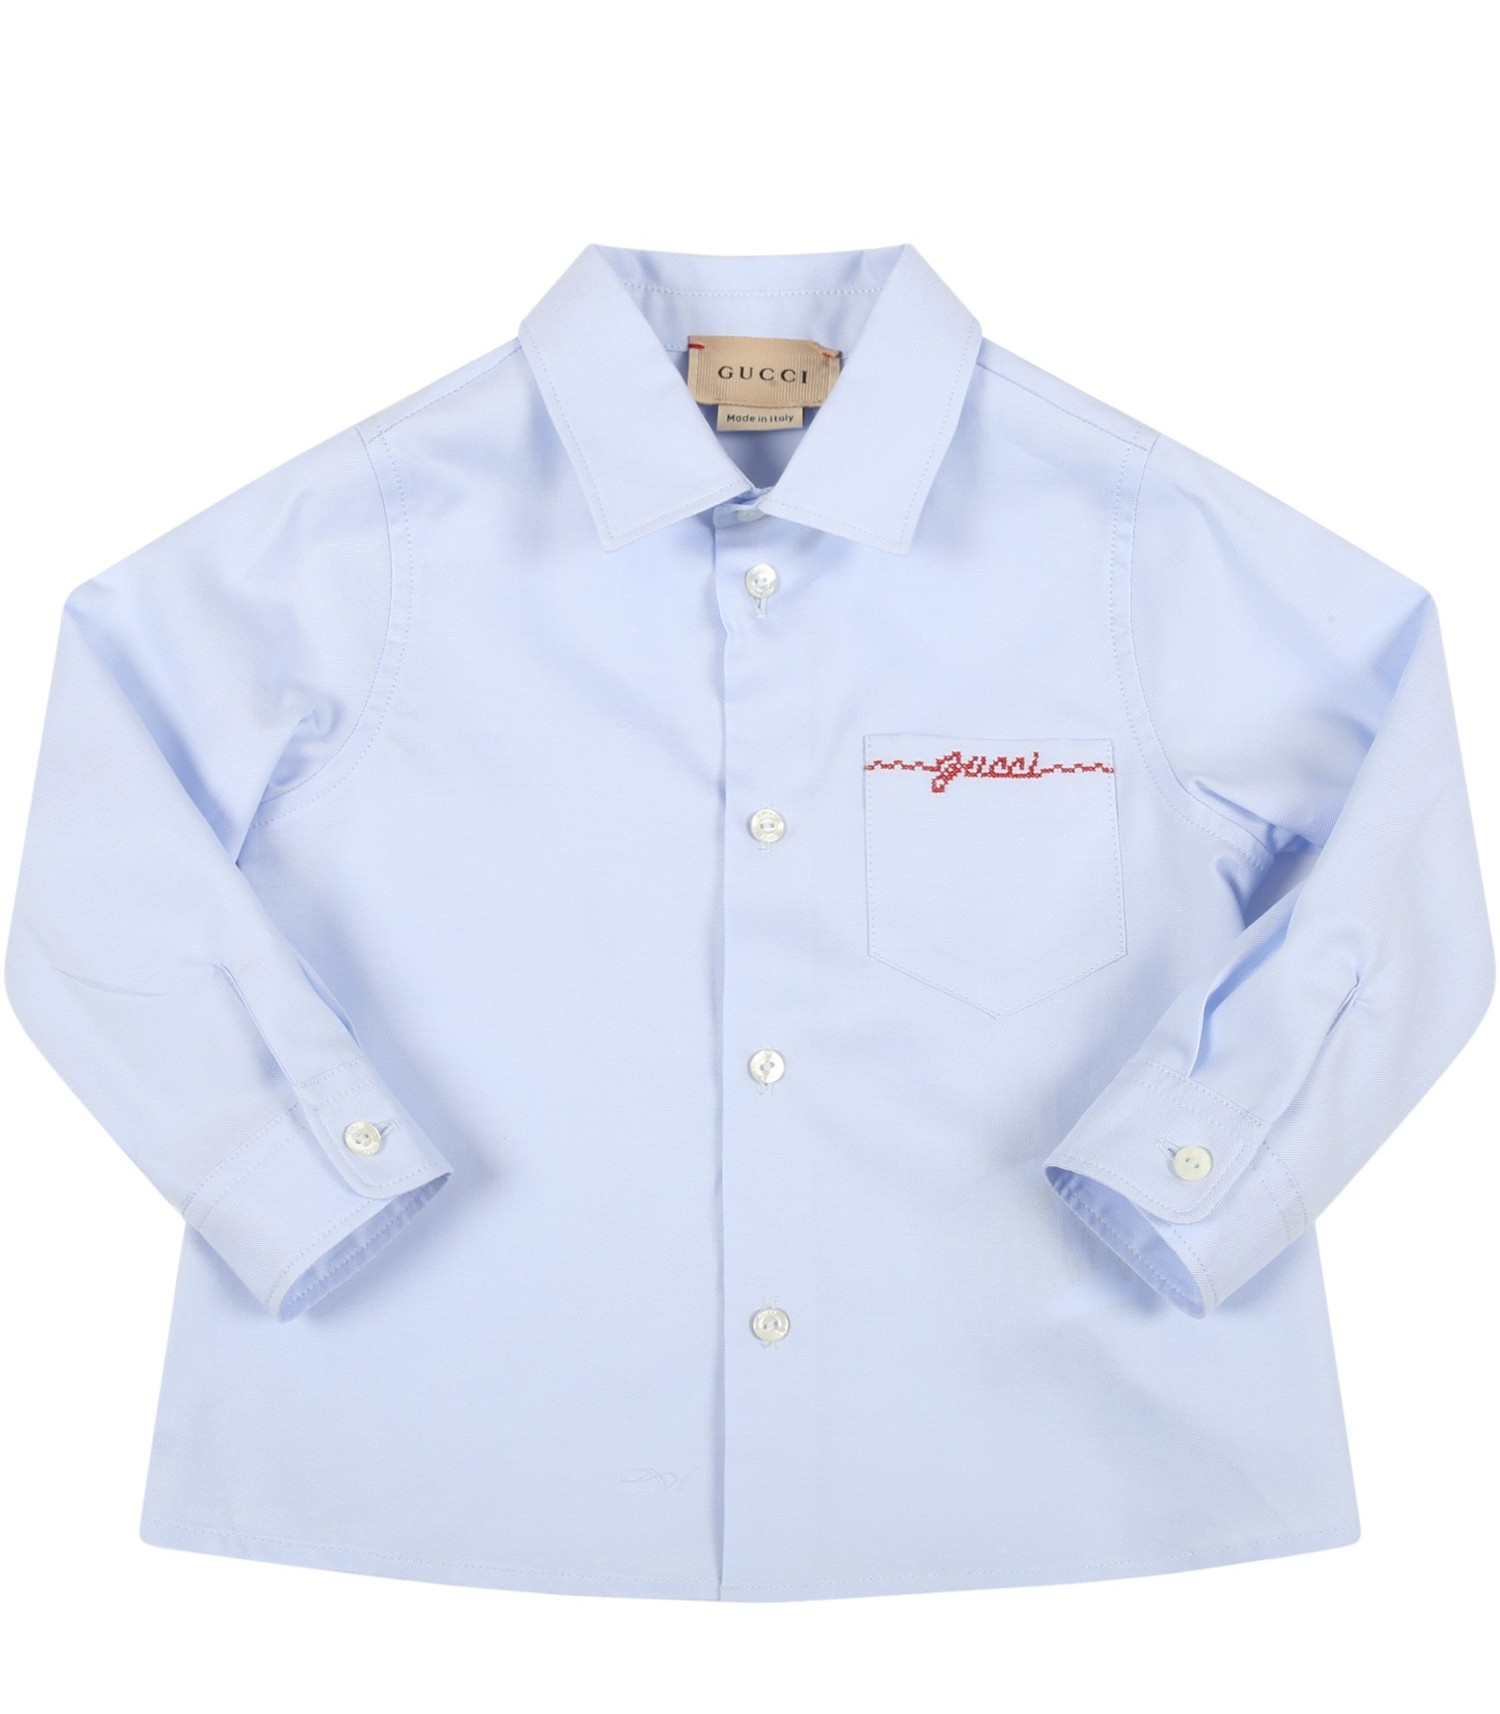 Gucci Kids Light blue shirt for baby boy with logo